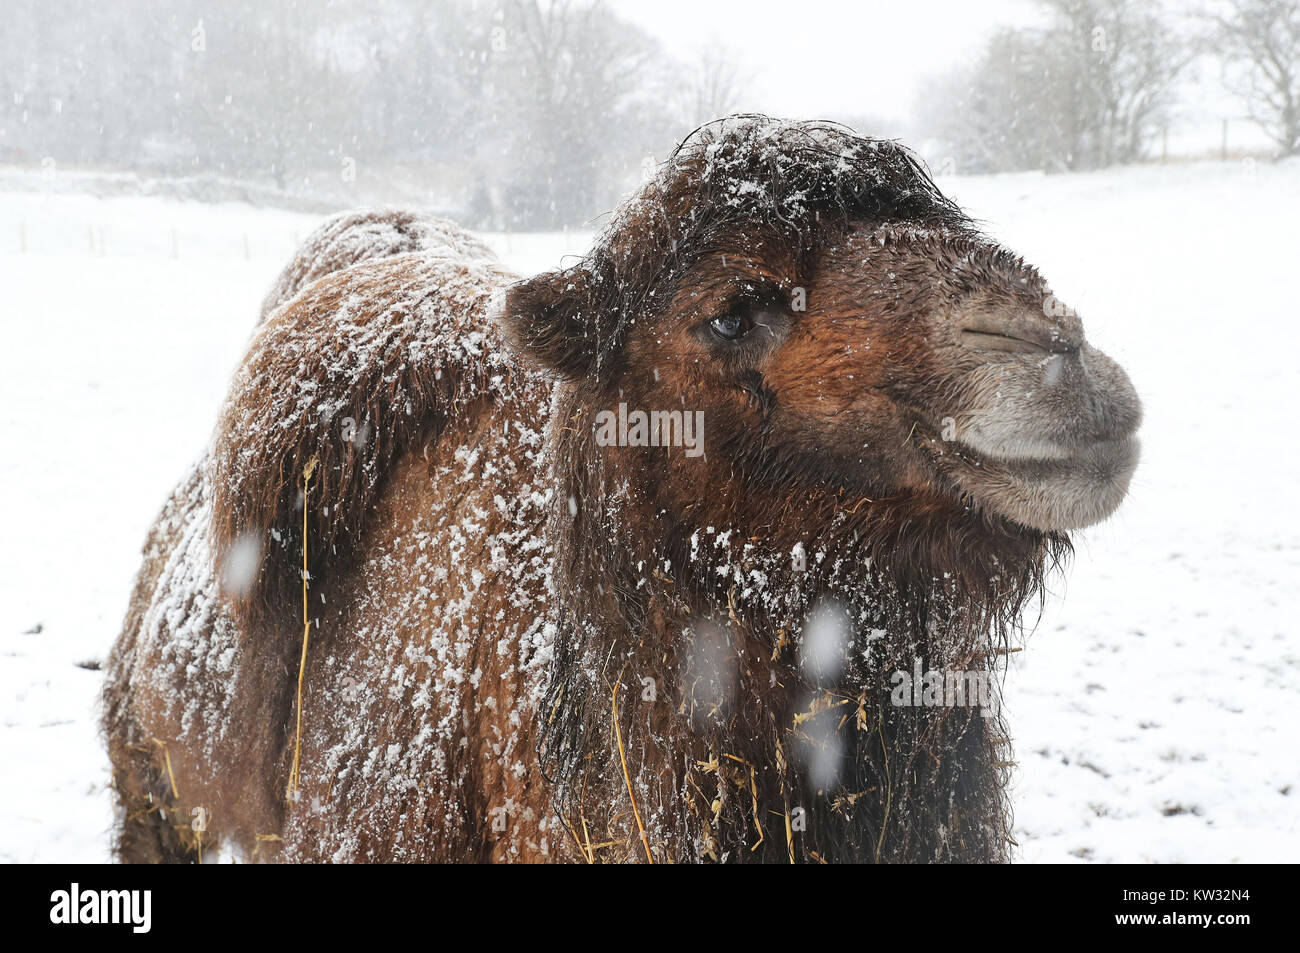 A camel stands in the snow at Mainsgill Farm near Richmond, North Yorkshire, after Britain saw one of the coldest nights of the year with temperatures falling to minus 12.3C at Loch Glascarnoch in the Scottish Highlands overnight and heavy snow expected over parts of the north of England. Stock Photo